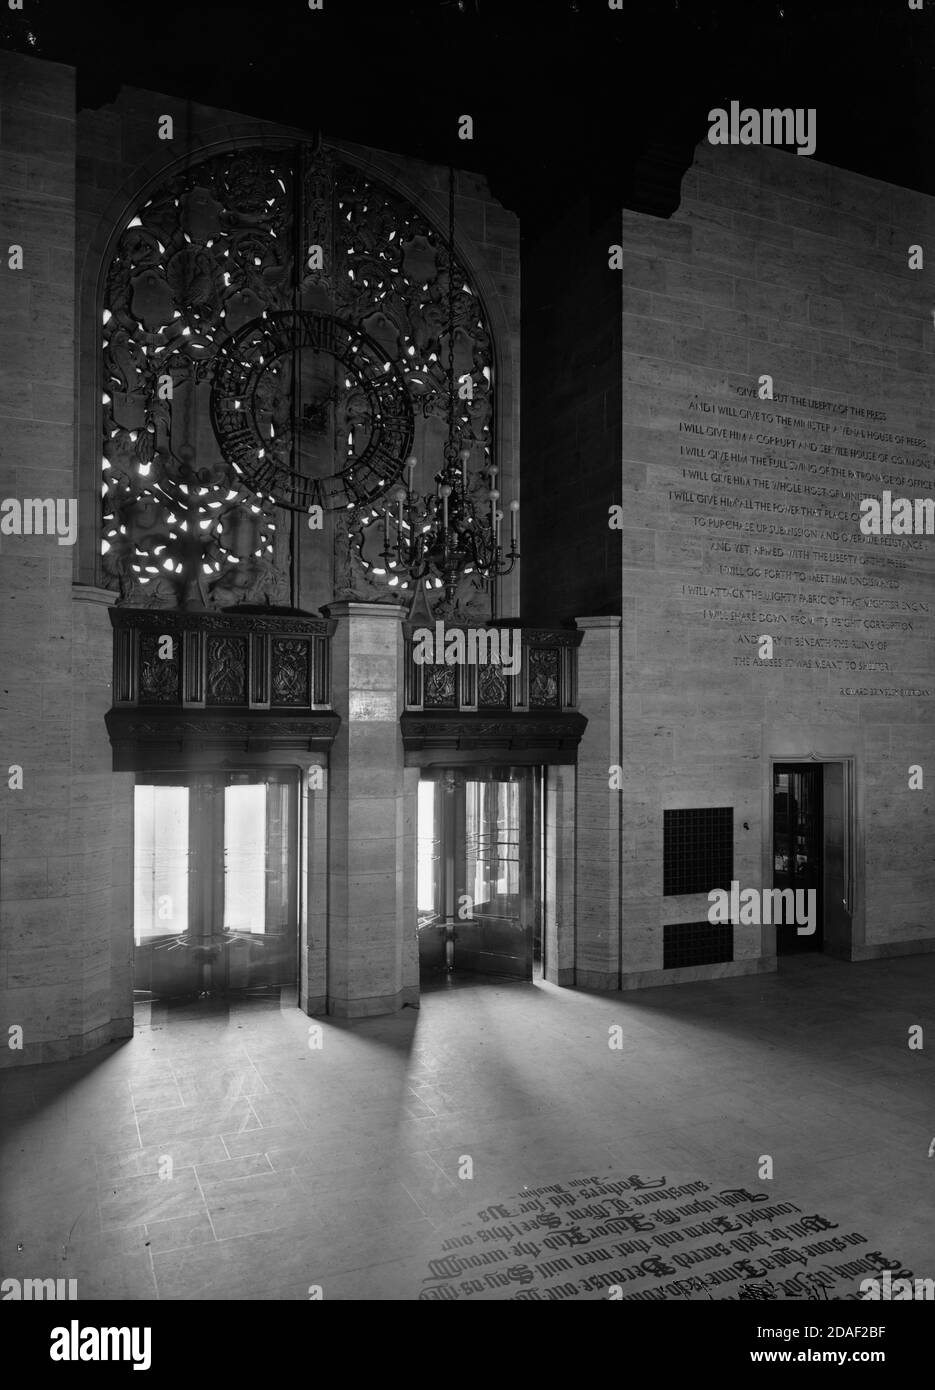 Interior view of entrance to Tribune Tower, showing John Ruskin quotation, architect Howells and Hood, in Chicago, Illinois, circa 1925-1936. Stock Photo